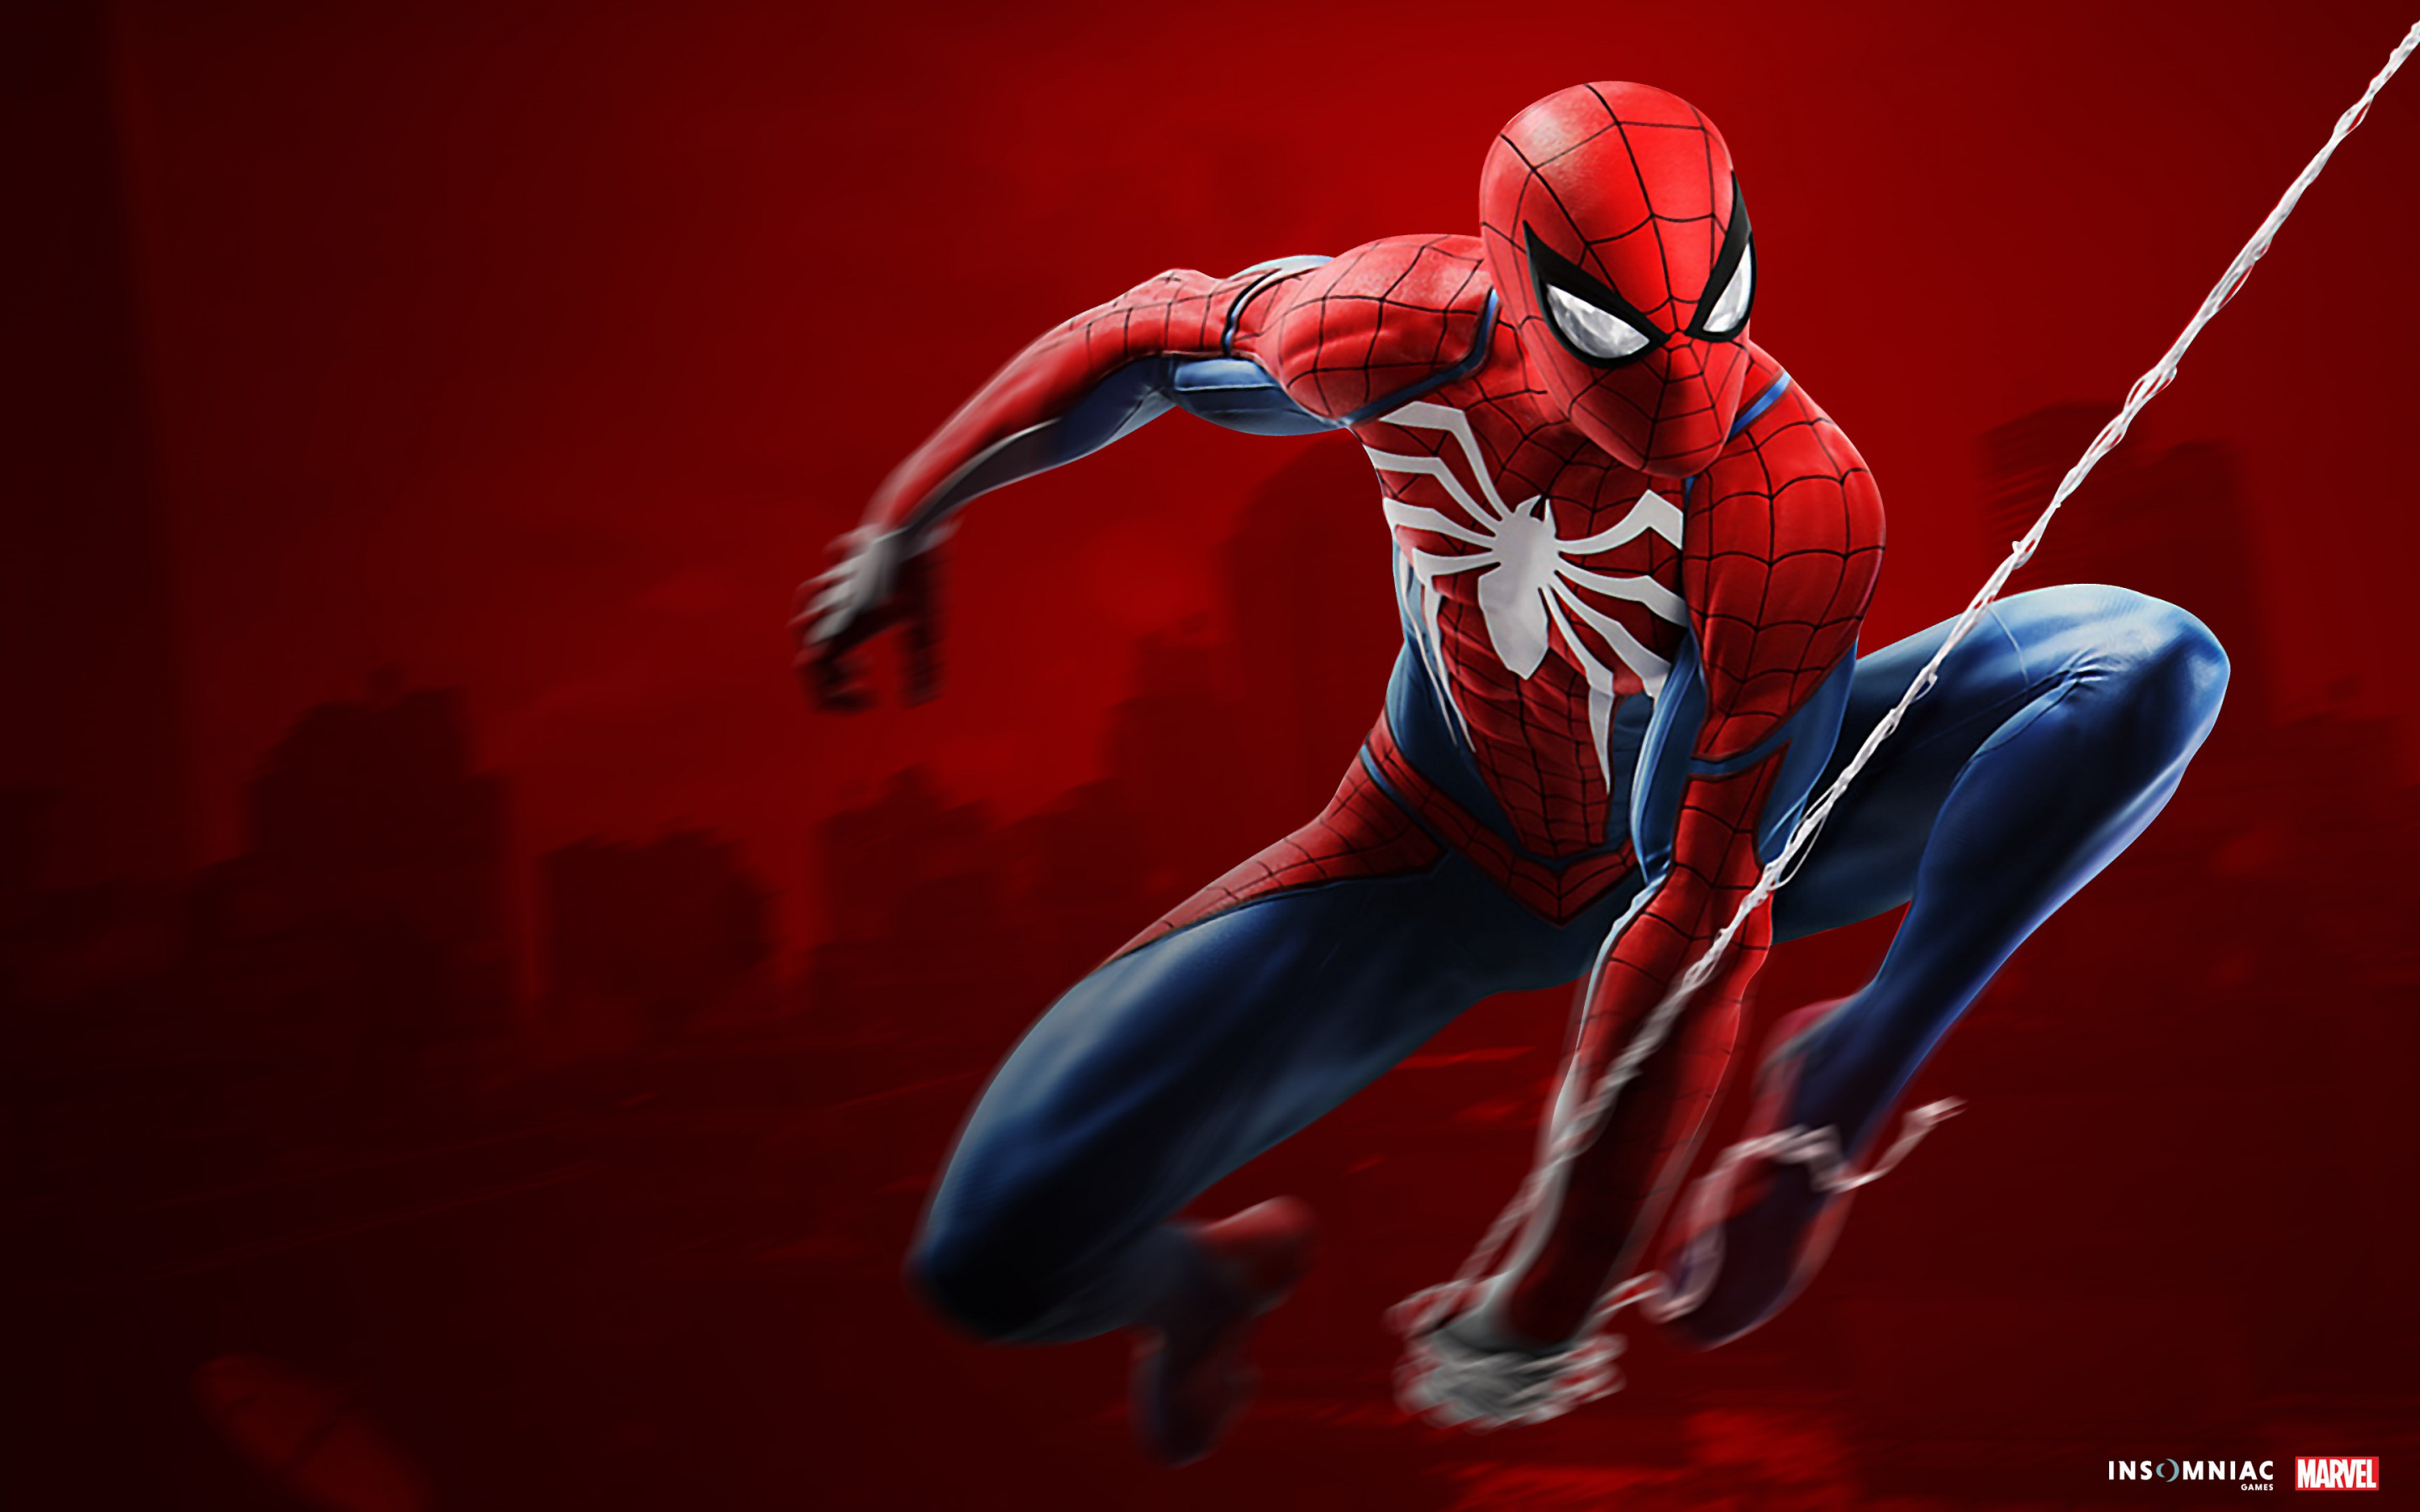 Spider Man game on PS4 wallpaper 2880x1800